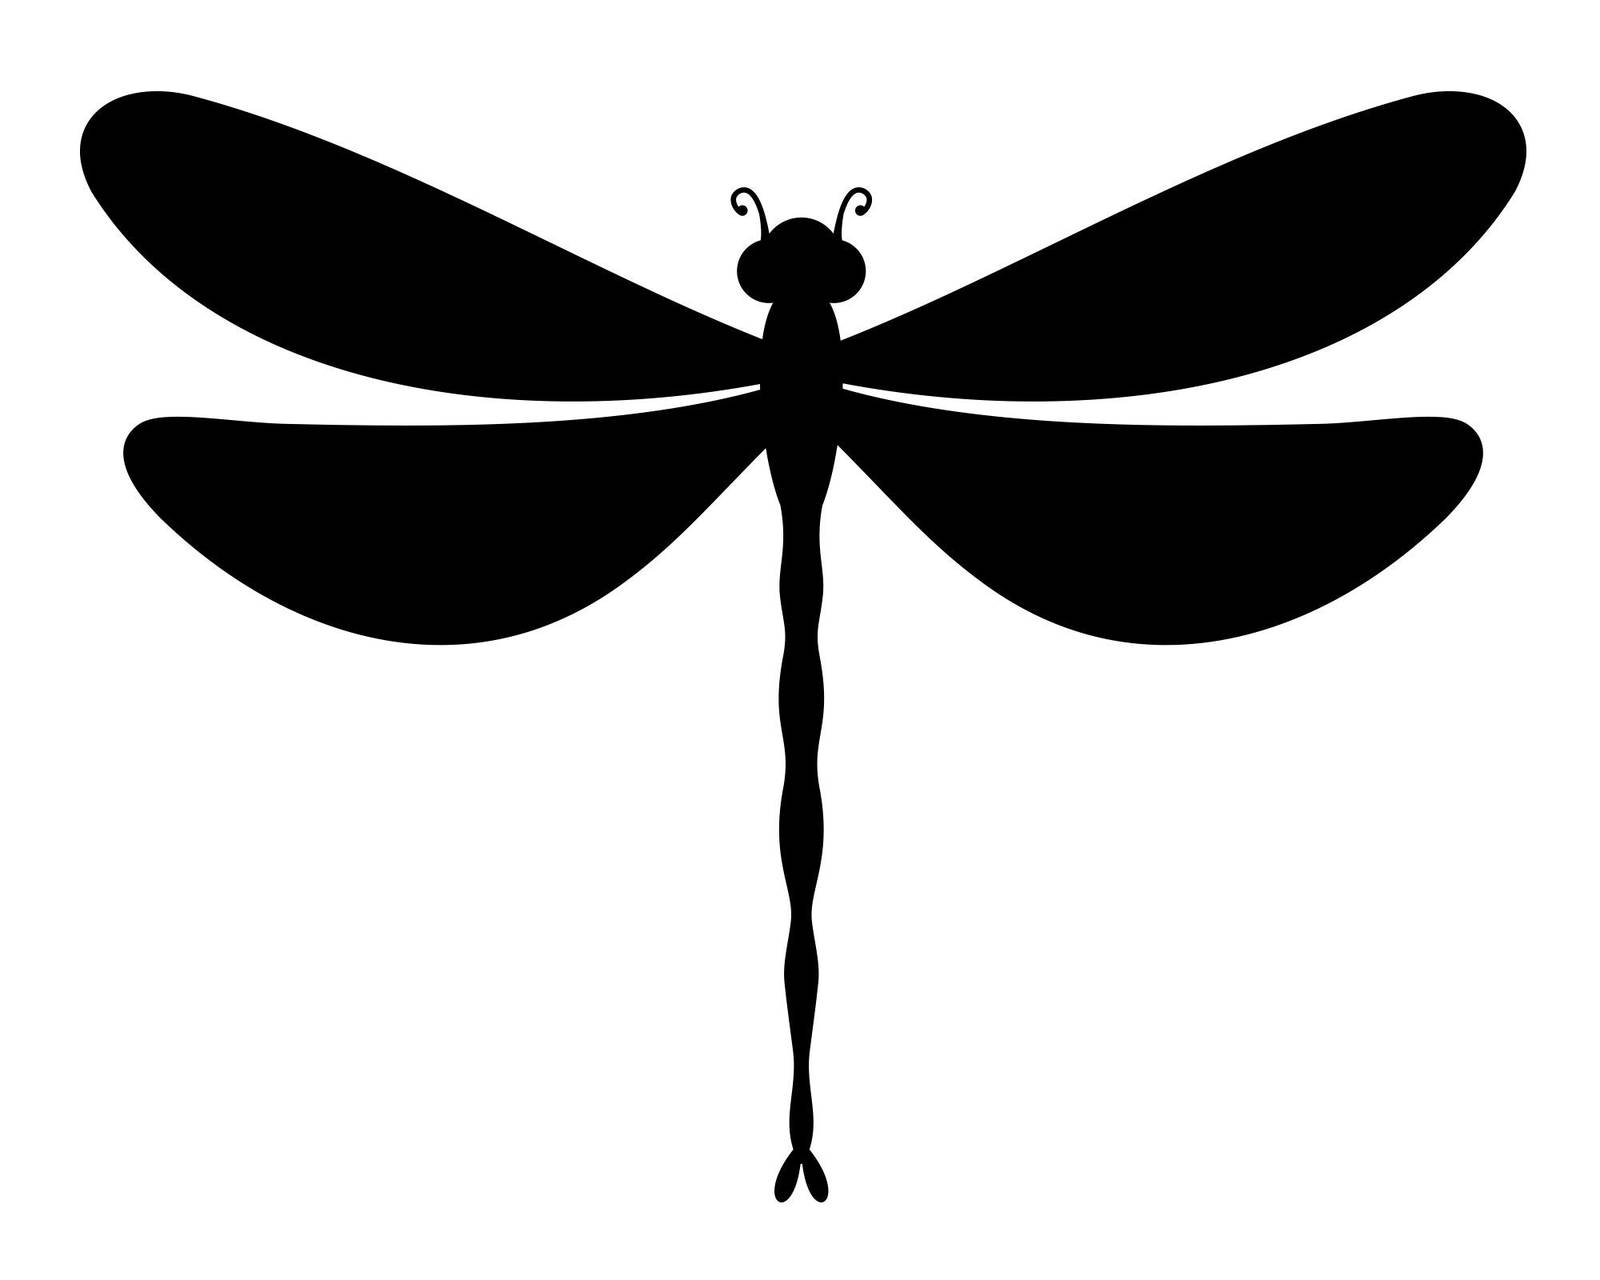 Dragonfly svg, dragonfly template, dragonfly dxf, dragonfly png ...